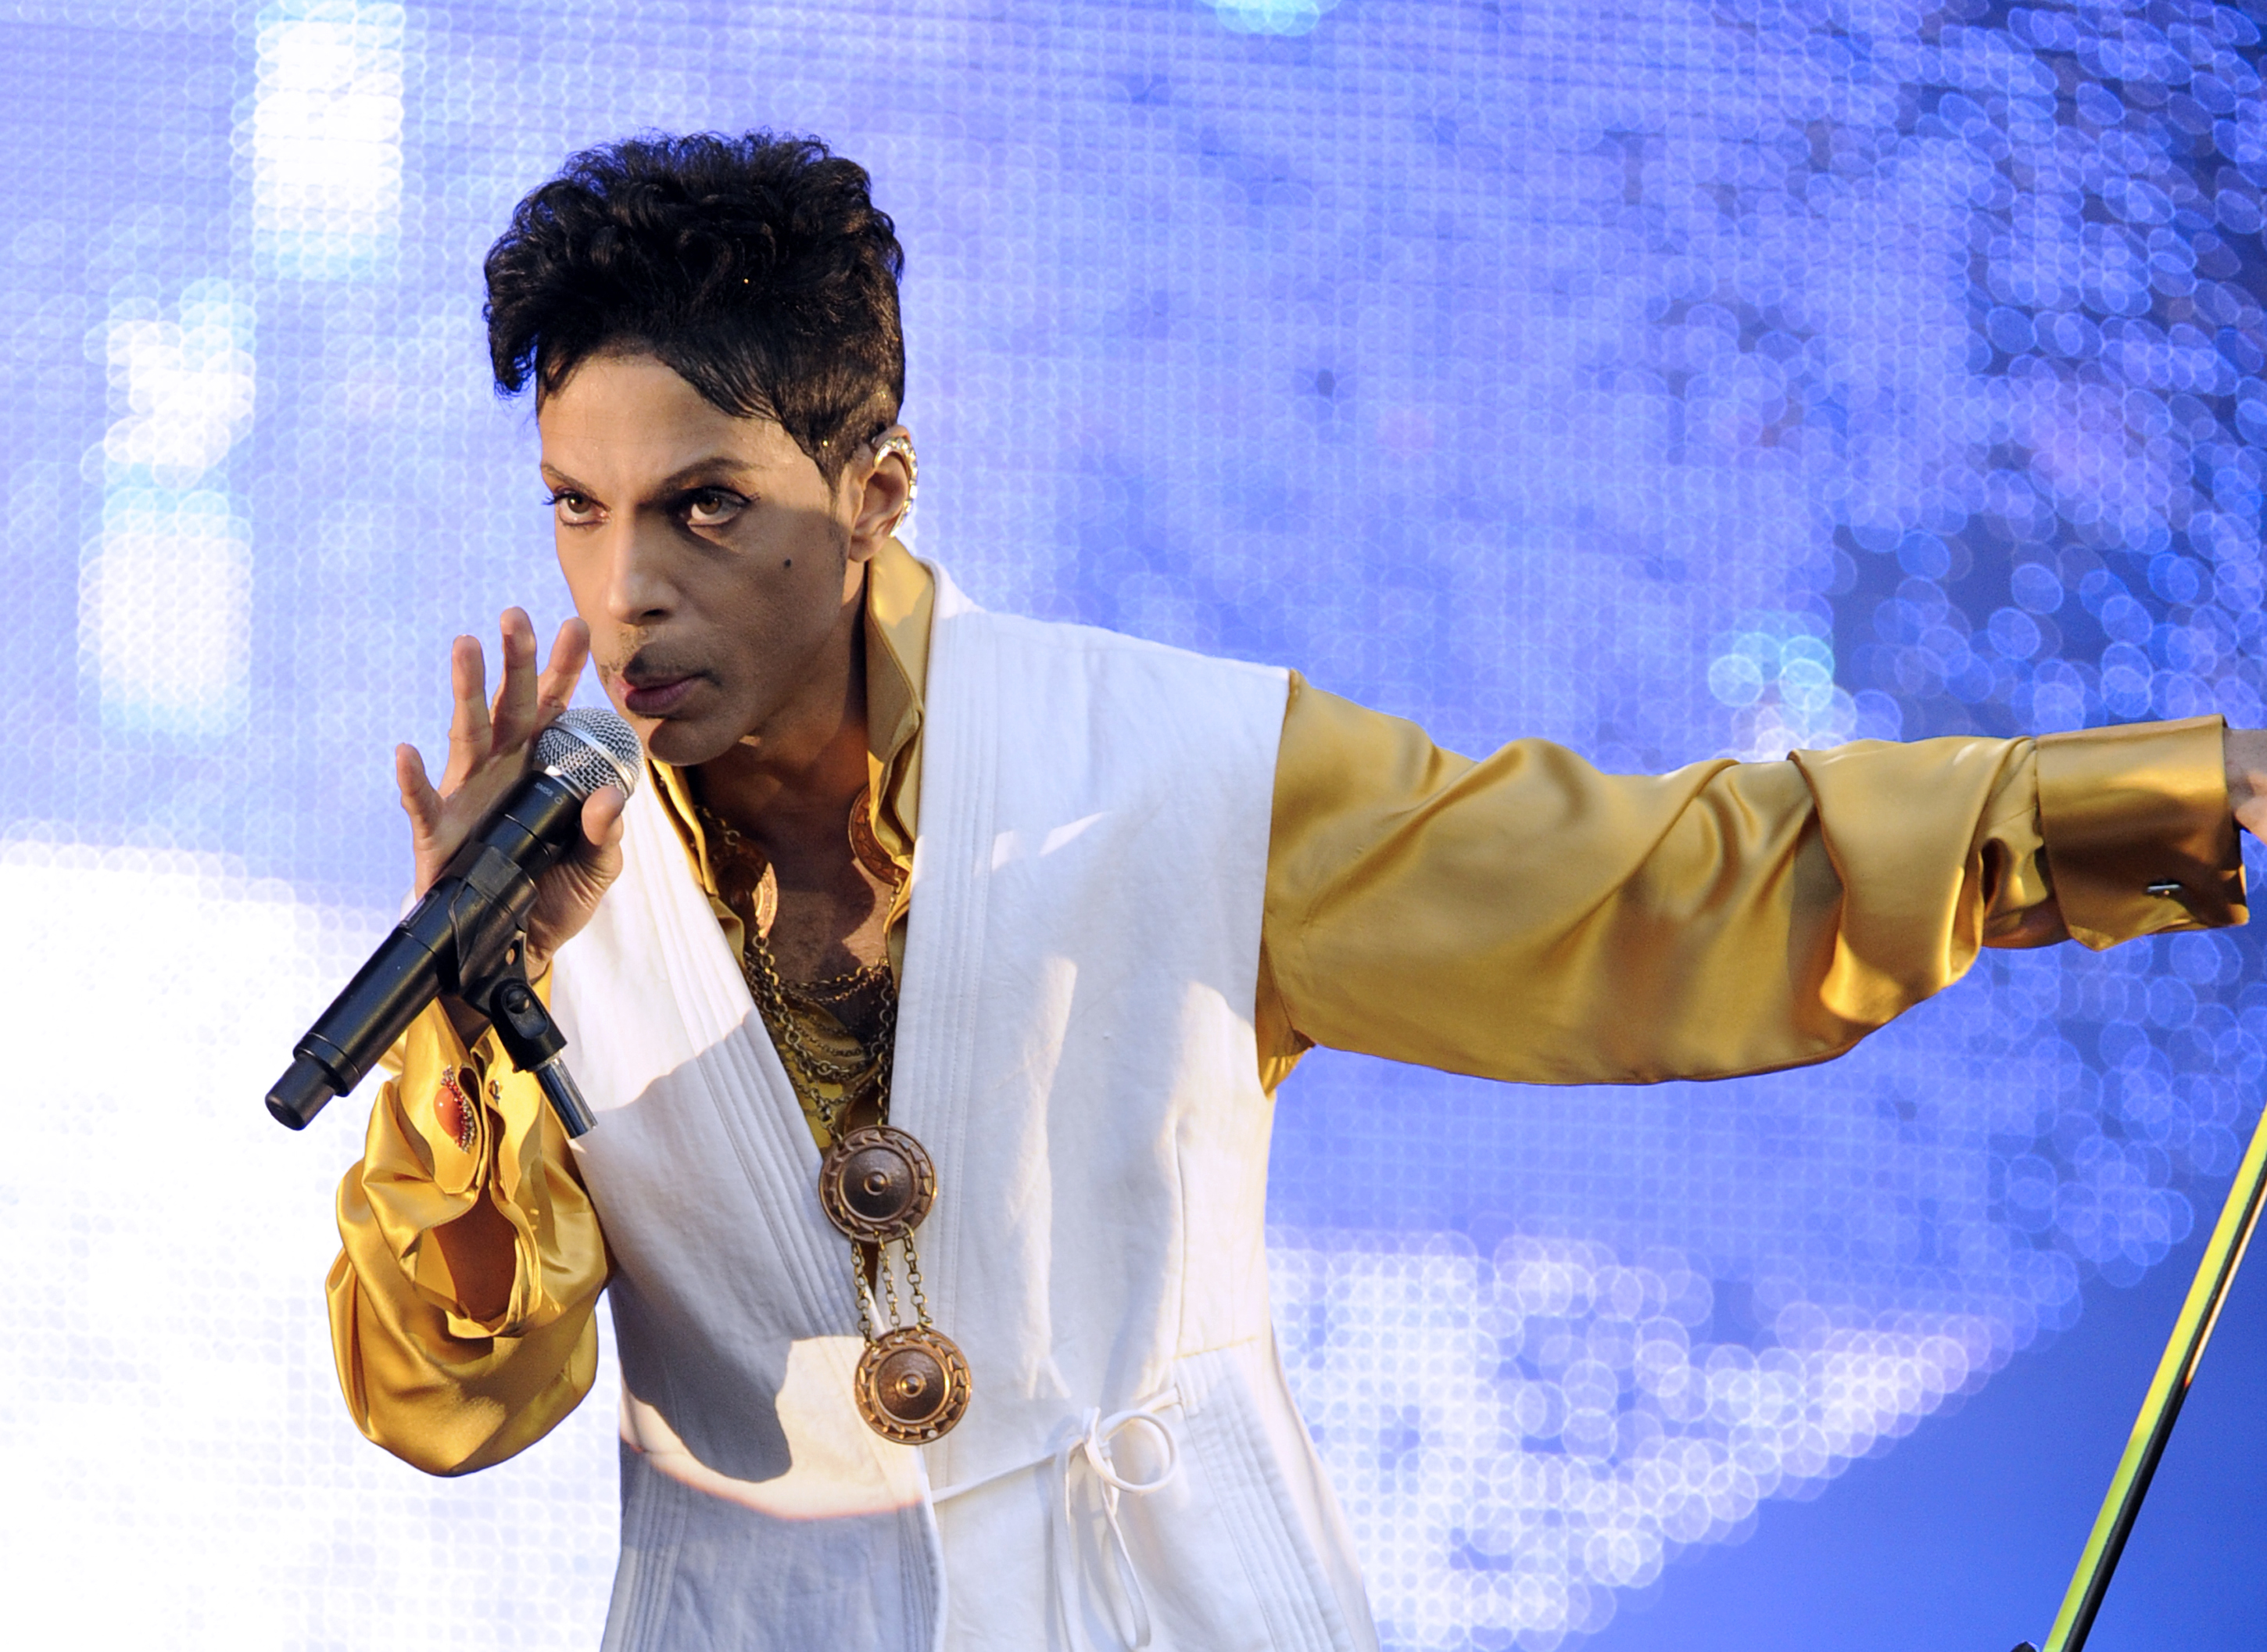 US singer and musician Prince (born Prince Rogers Nelson) performs on stage at the Stade de France in Saint-Denis, outside Paris, on June 30, 2011. (Betrand Guay—AFP/Getty Images)